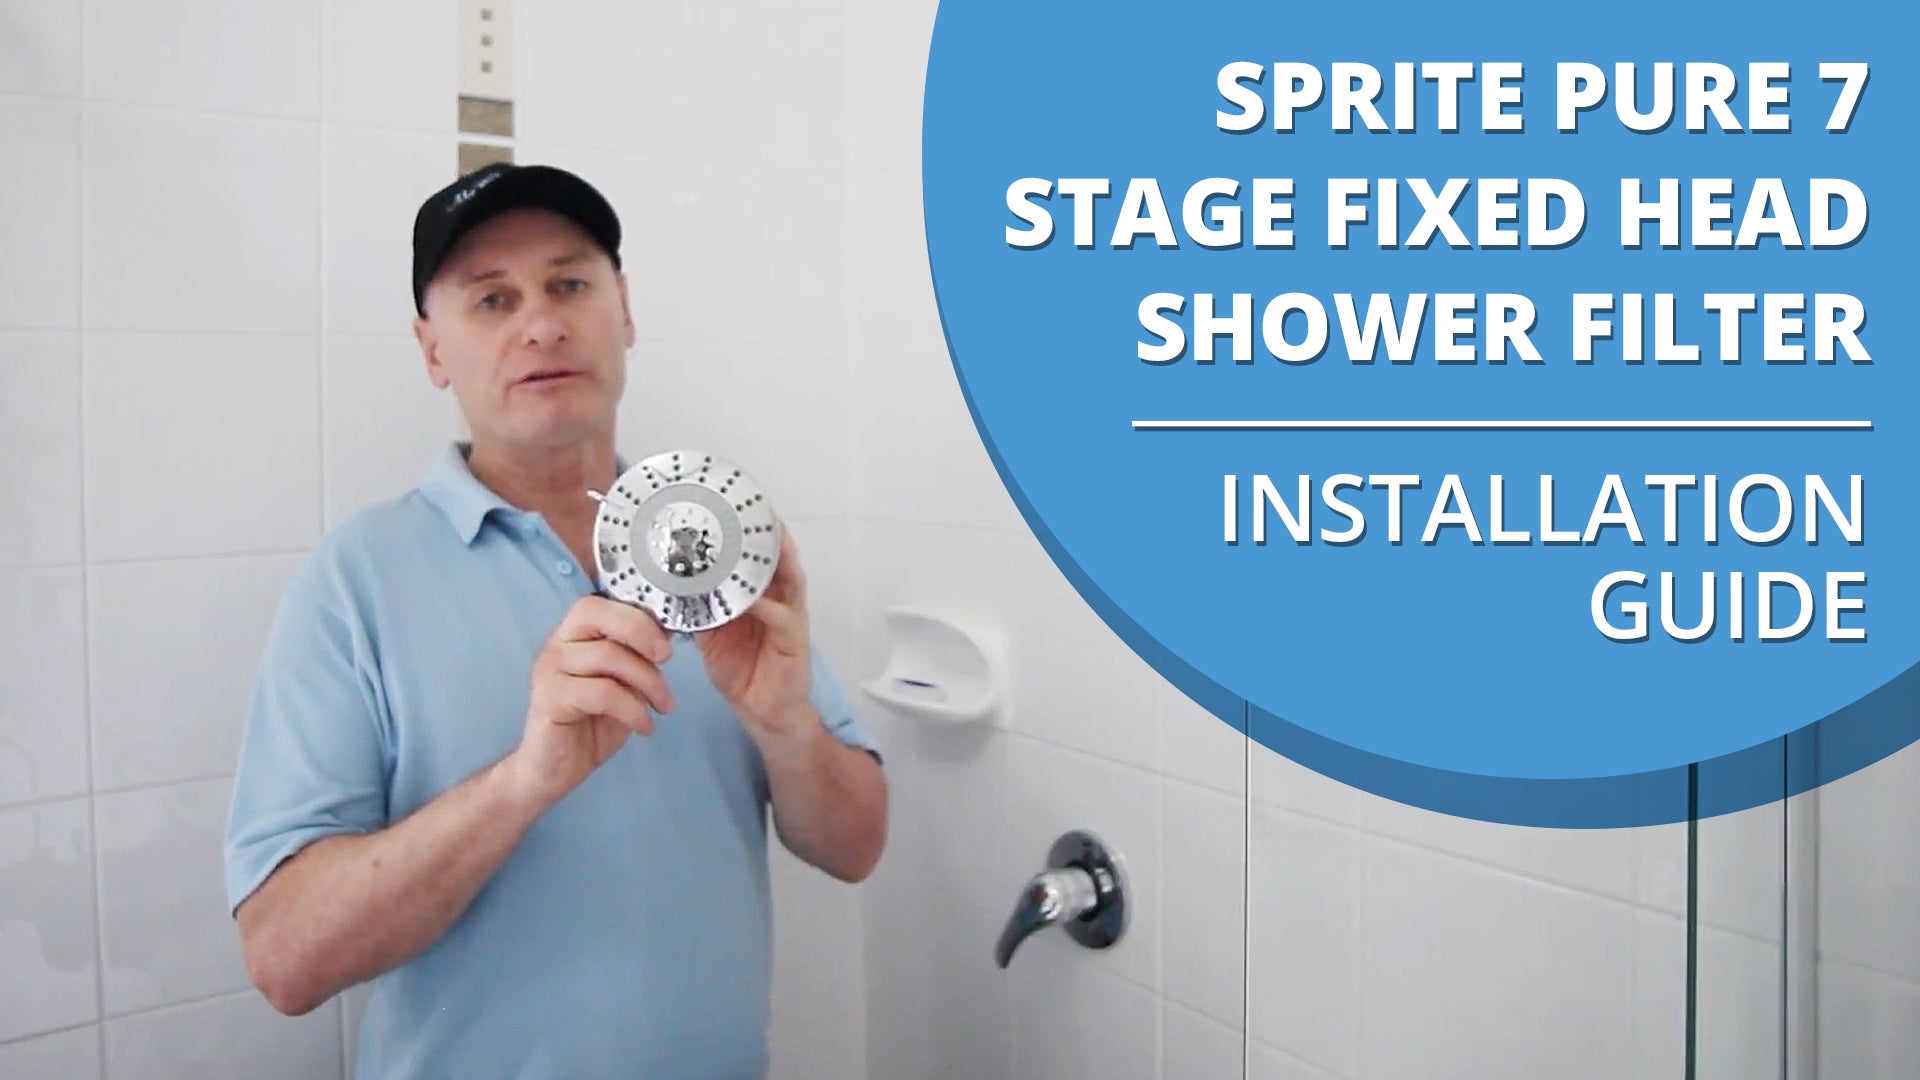 How to install your Sprite Shower Pure 7 Stage Fixed Head Shower Filter